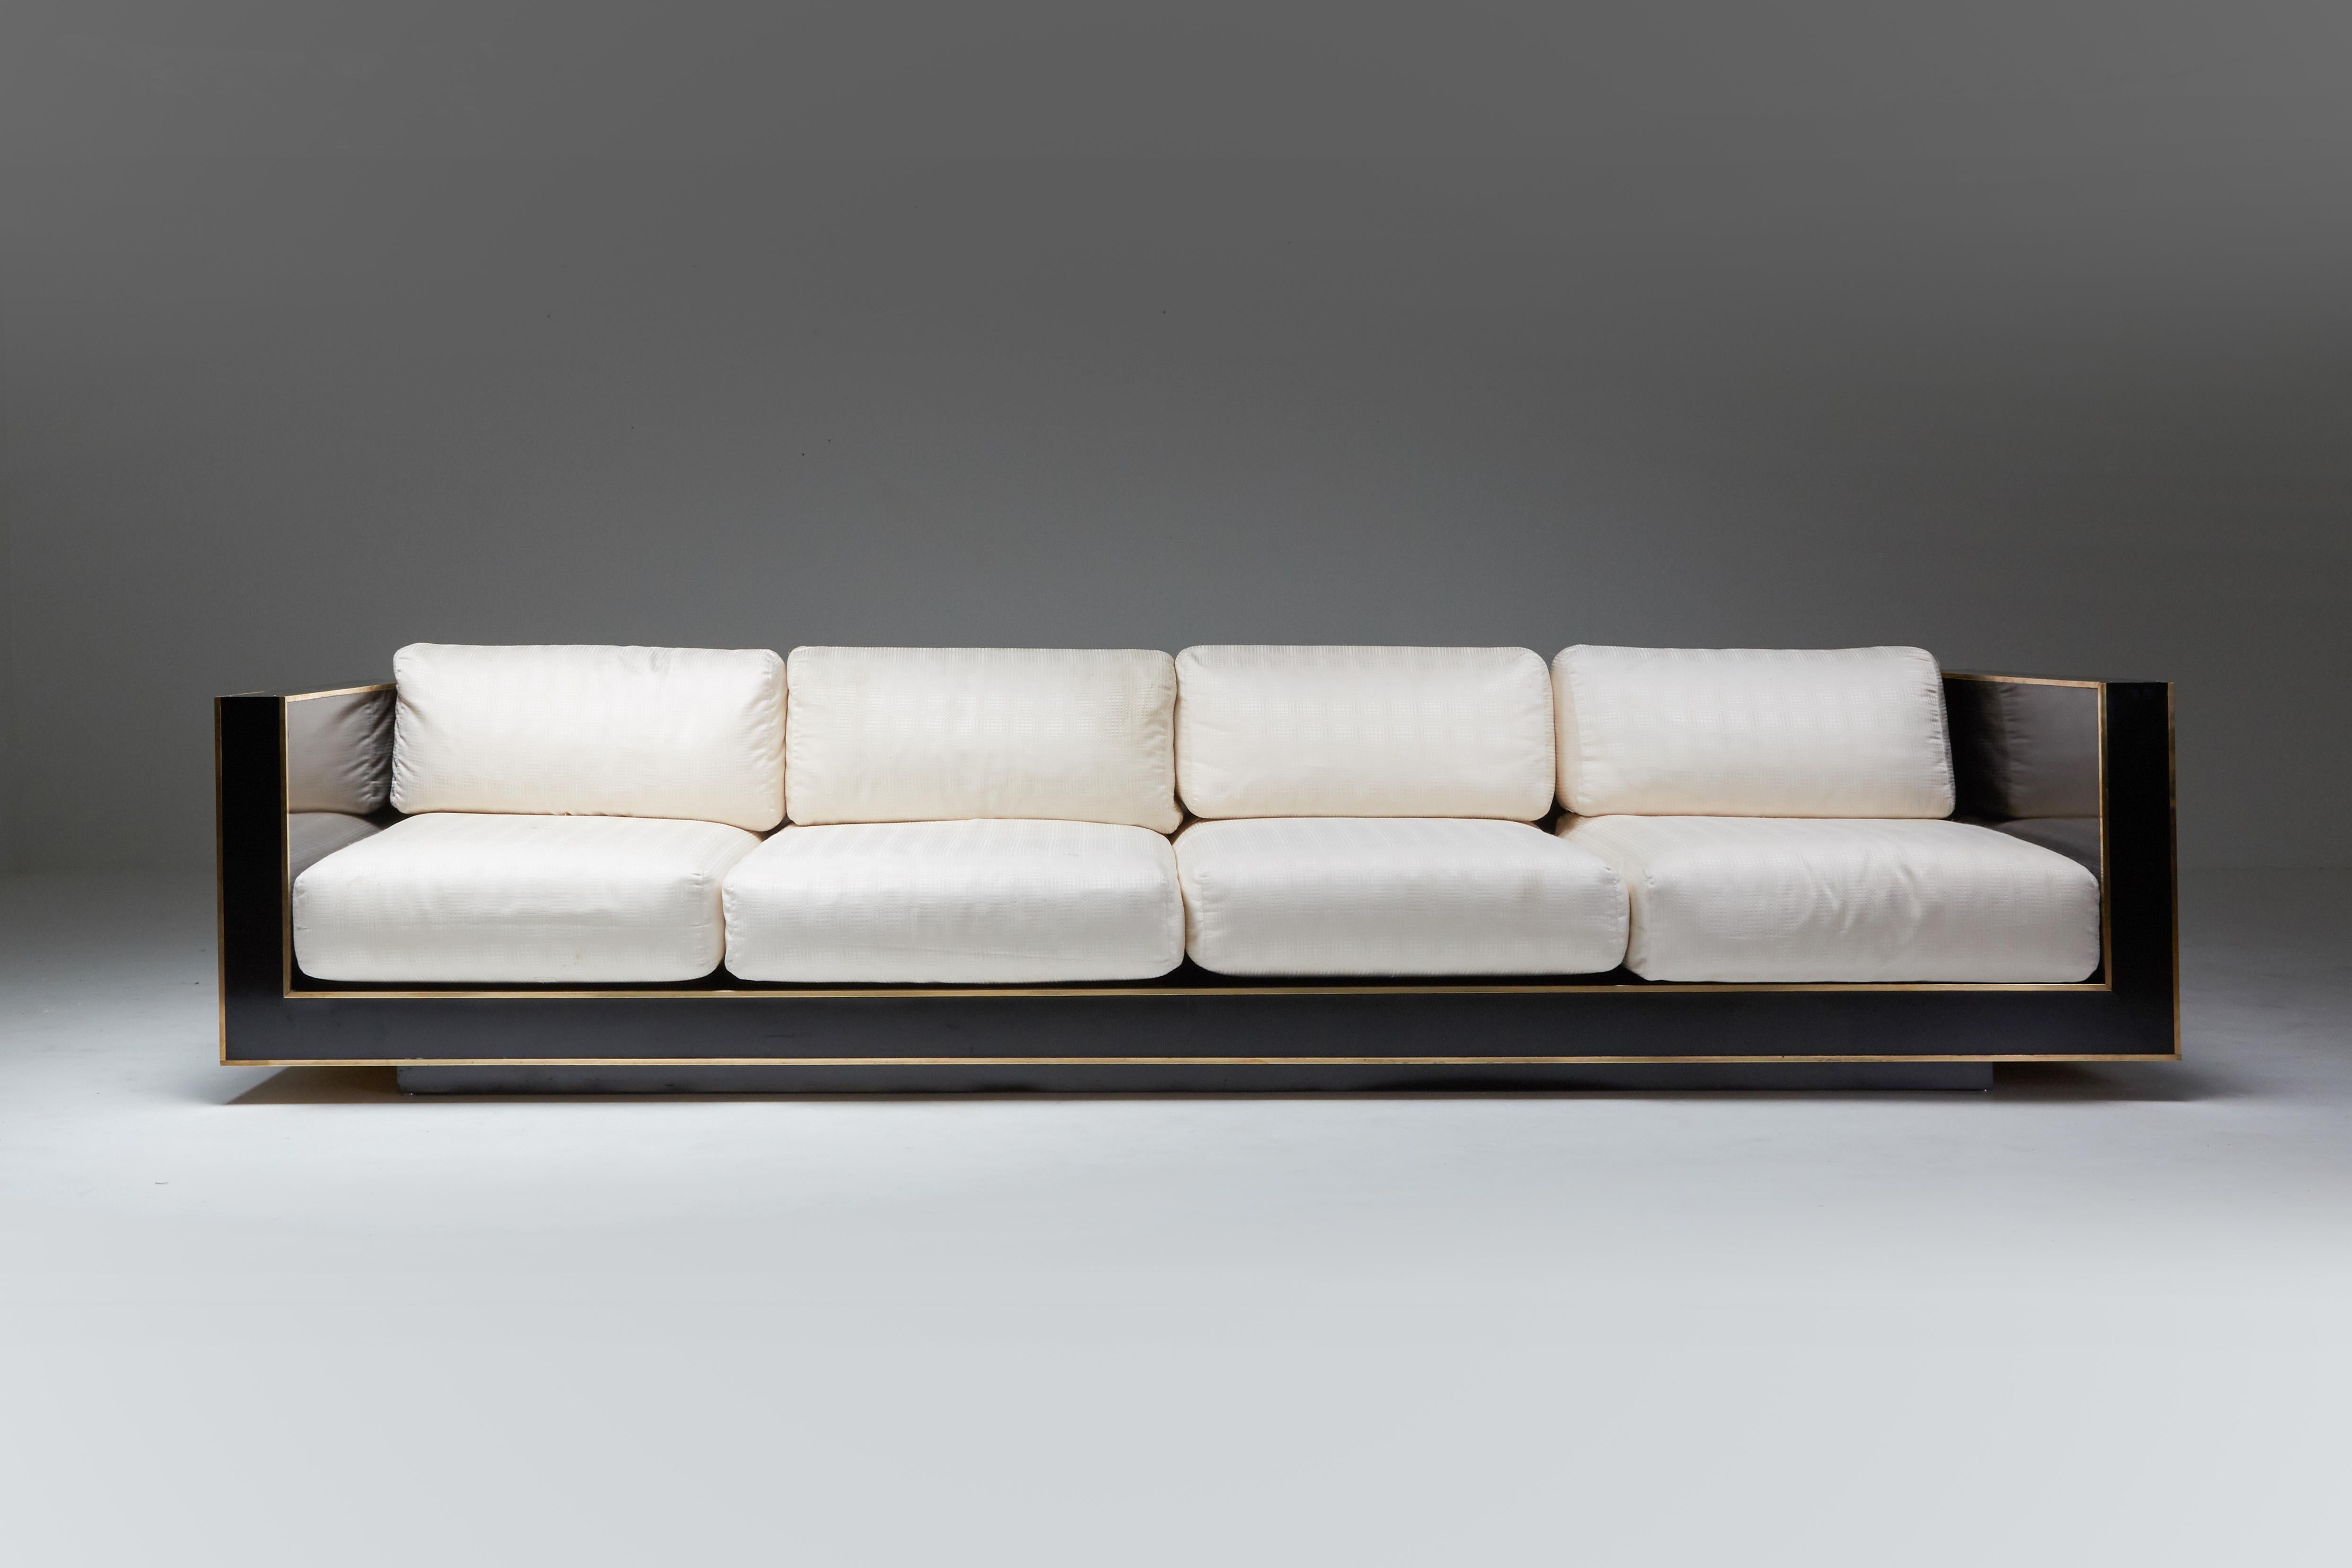 Hollywood Regency; Romeo Rega; Italy; 1970s; Four-Seater Sofa; Italian Design; Minimalist; Quality Italian Craftsmanship; Sophisticated Modernist Furniture;

High-end couch in black formica with solid brass linings. Its minimal design and strong